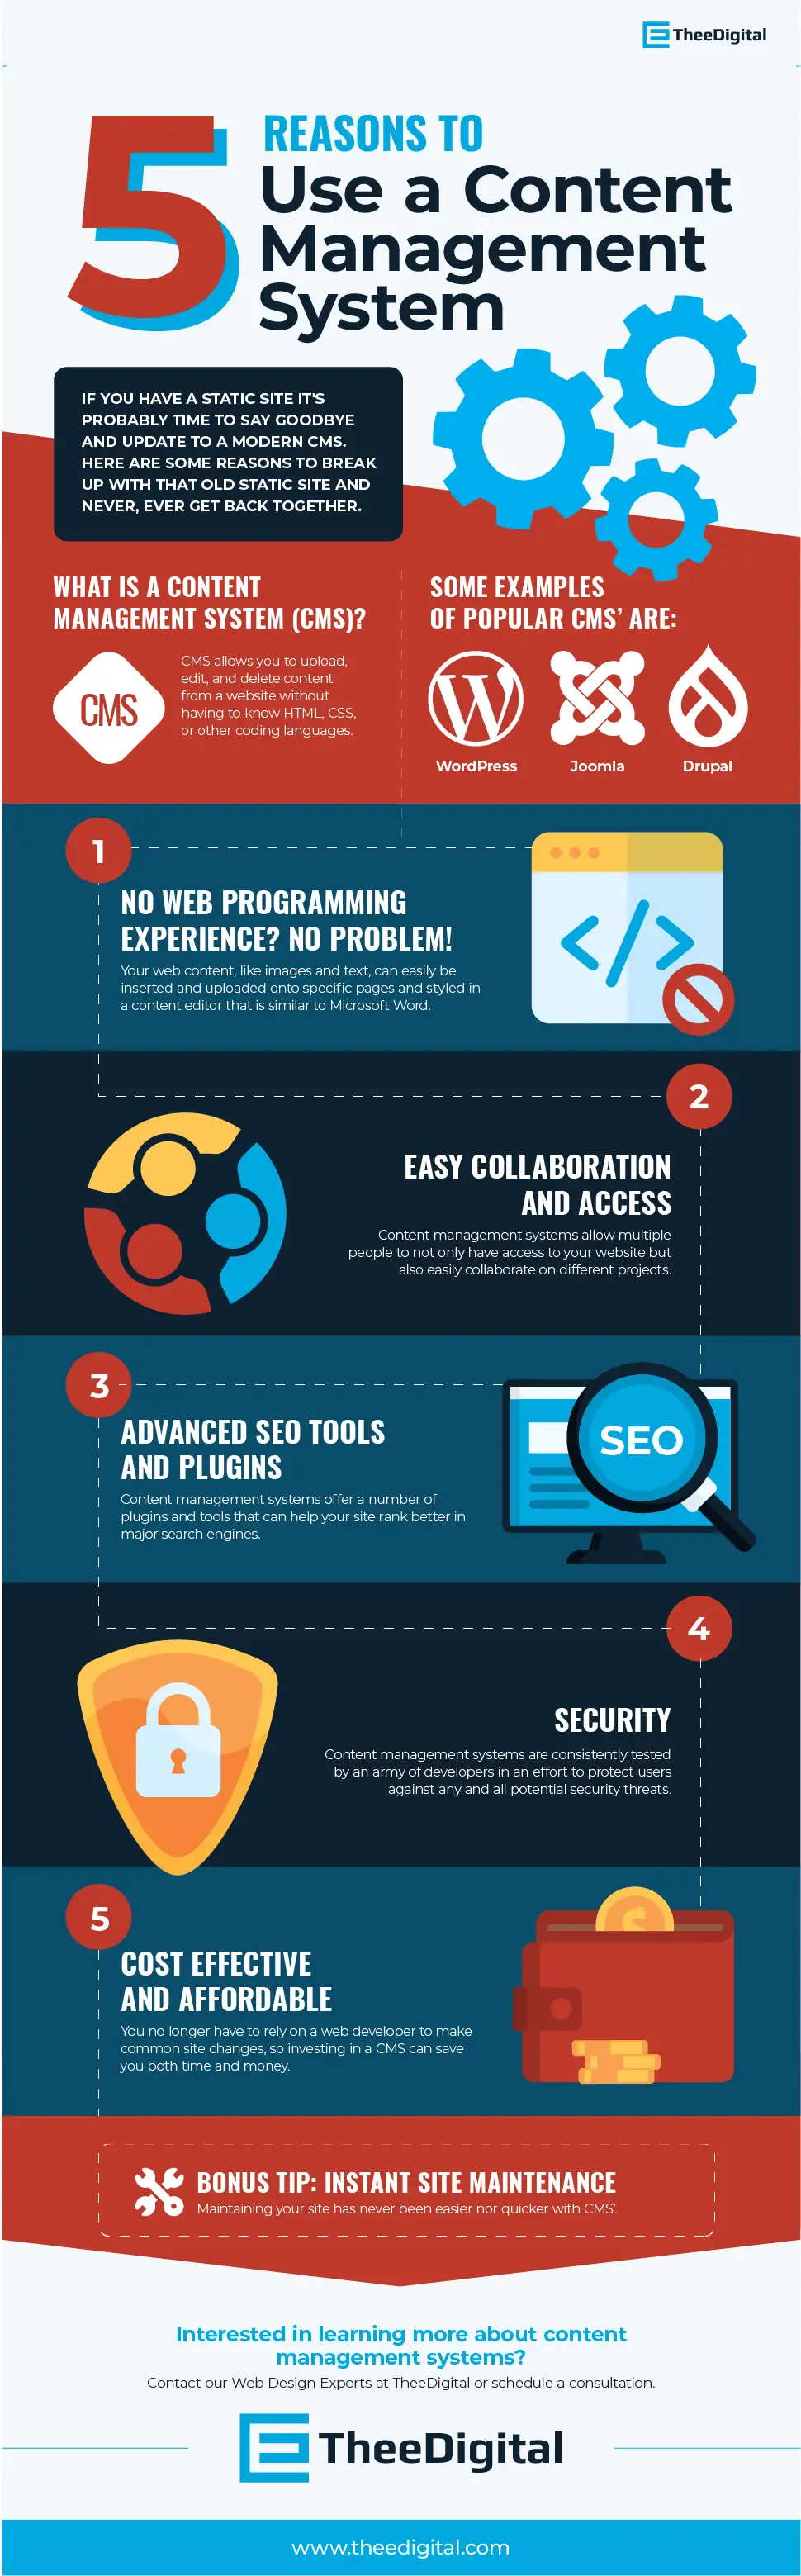 Infographic that says 5 reasons to use a content management system